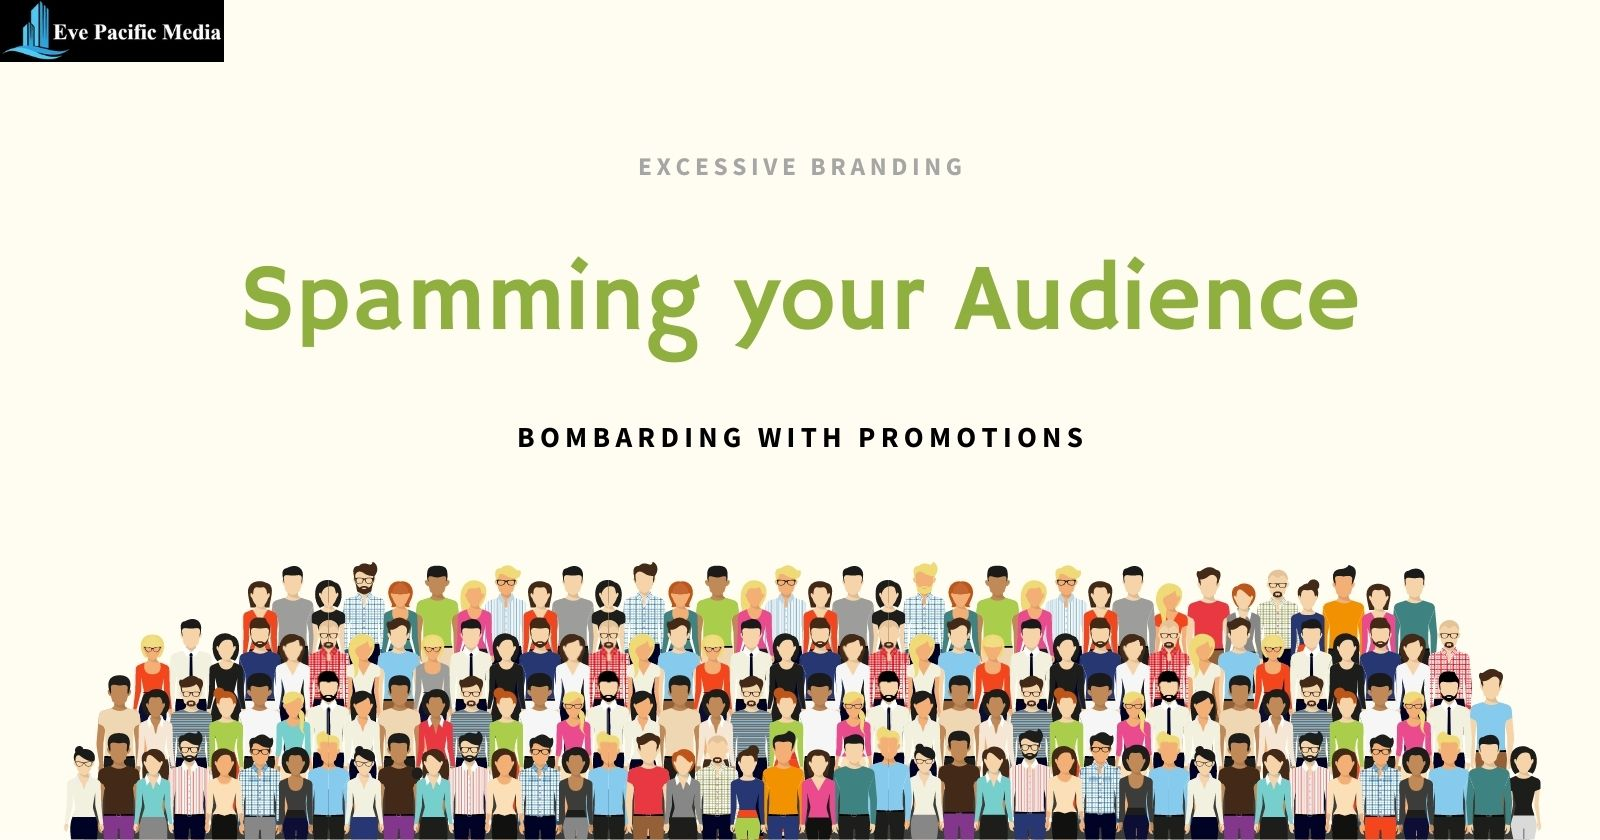 Crowd with a text "Spamming your Audience"